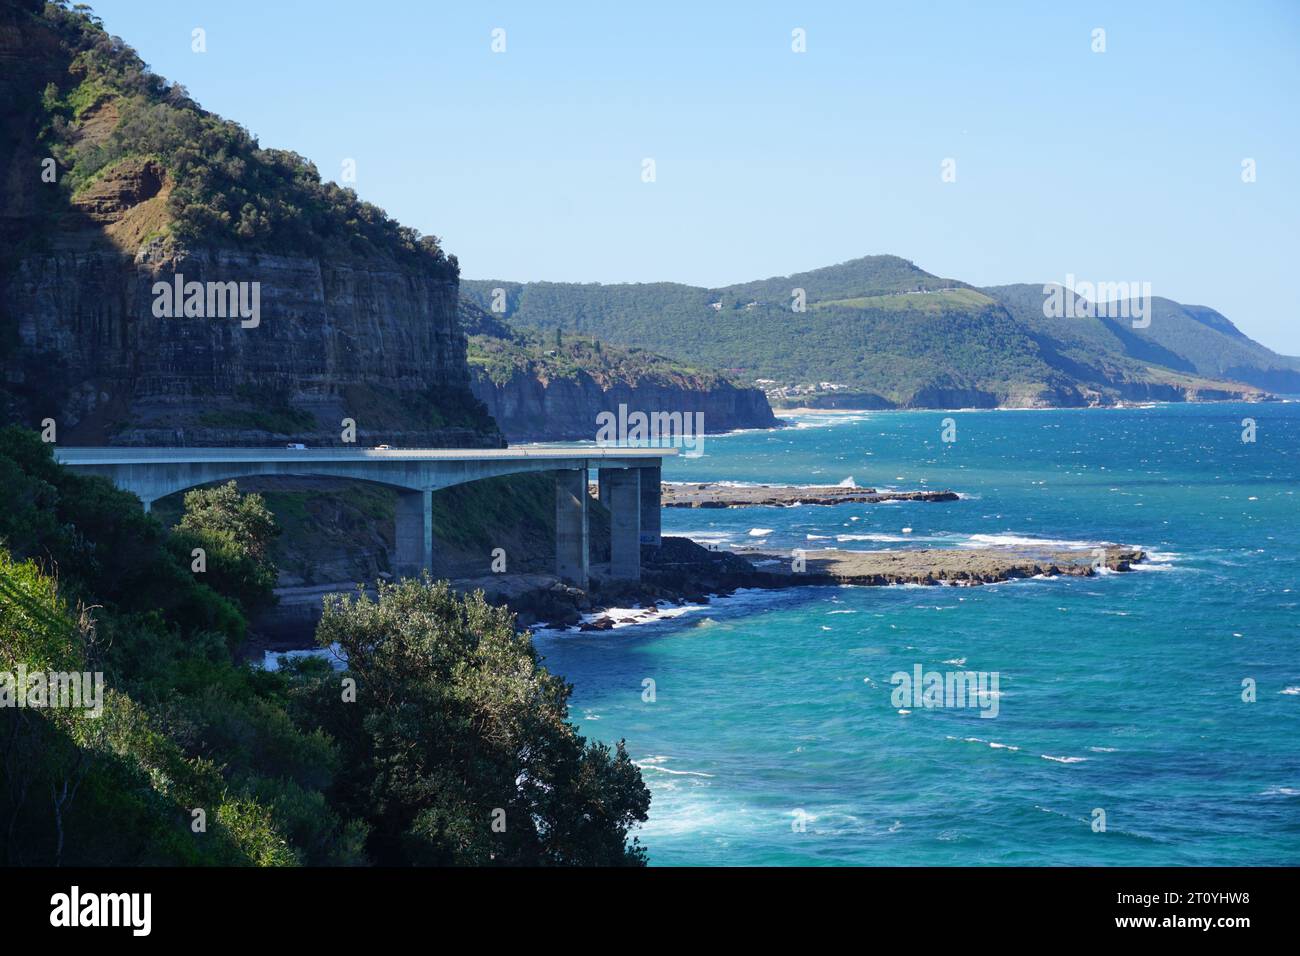 Lookout view over the Sea Cliff Bridge along the Grand Pacific Drive, a road overhanging the ocean in New South Wales, Australia Stock Photo